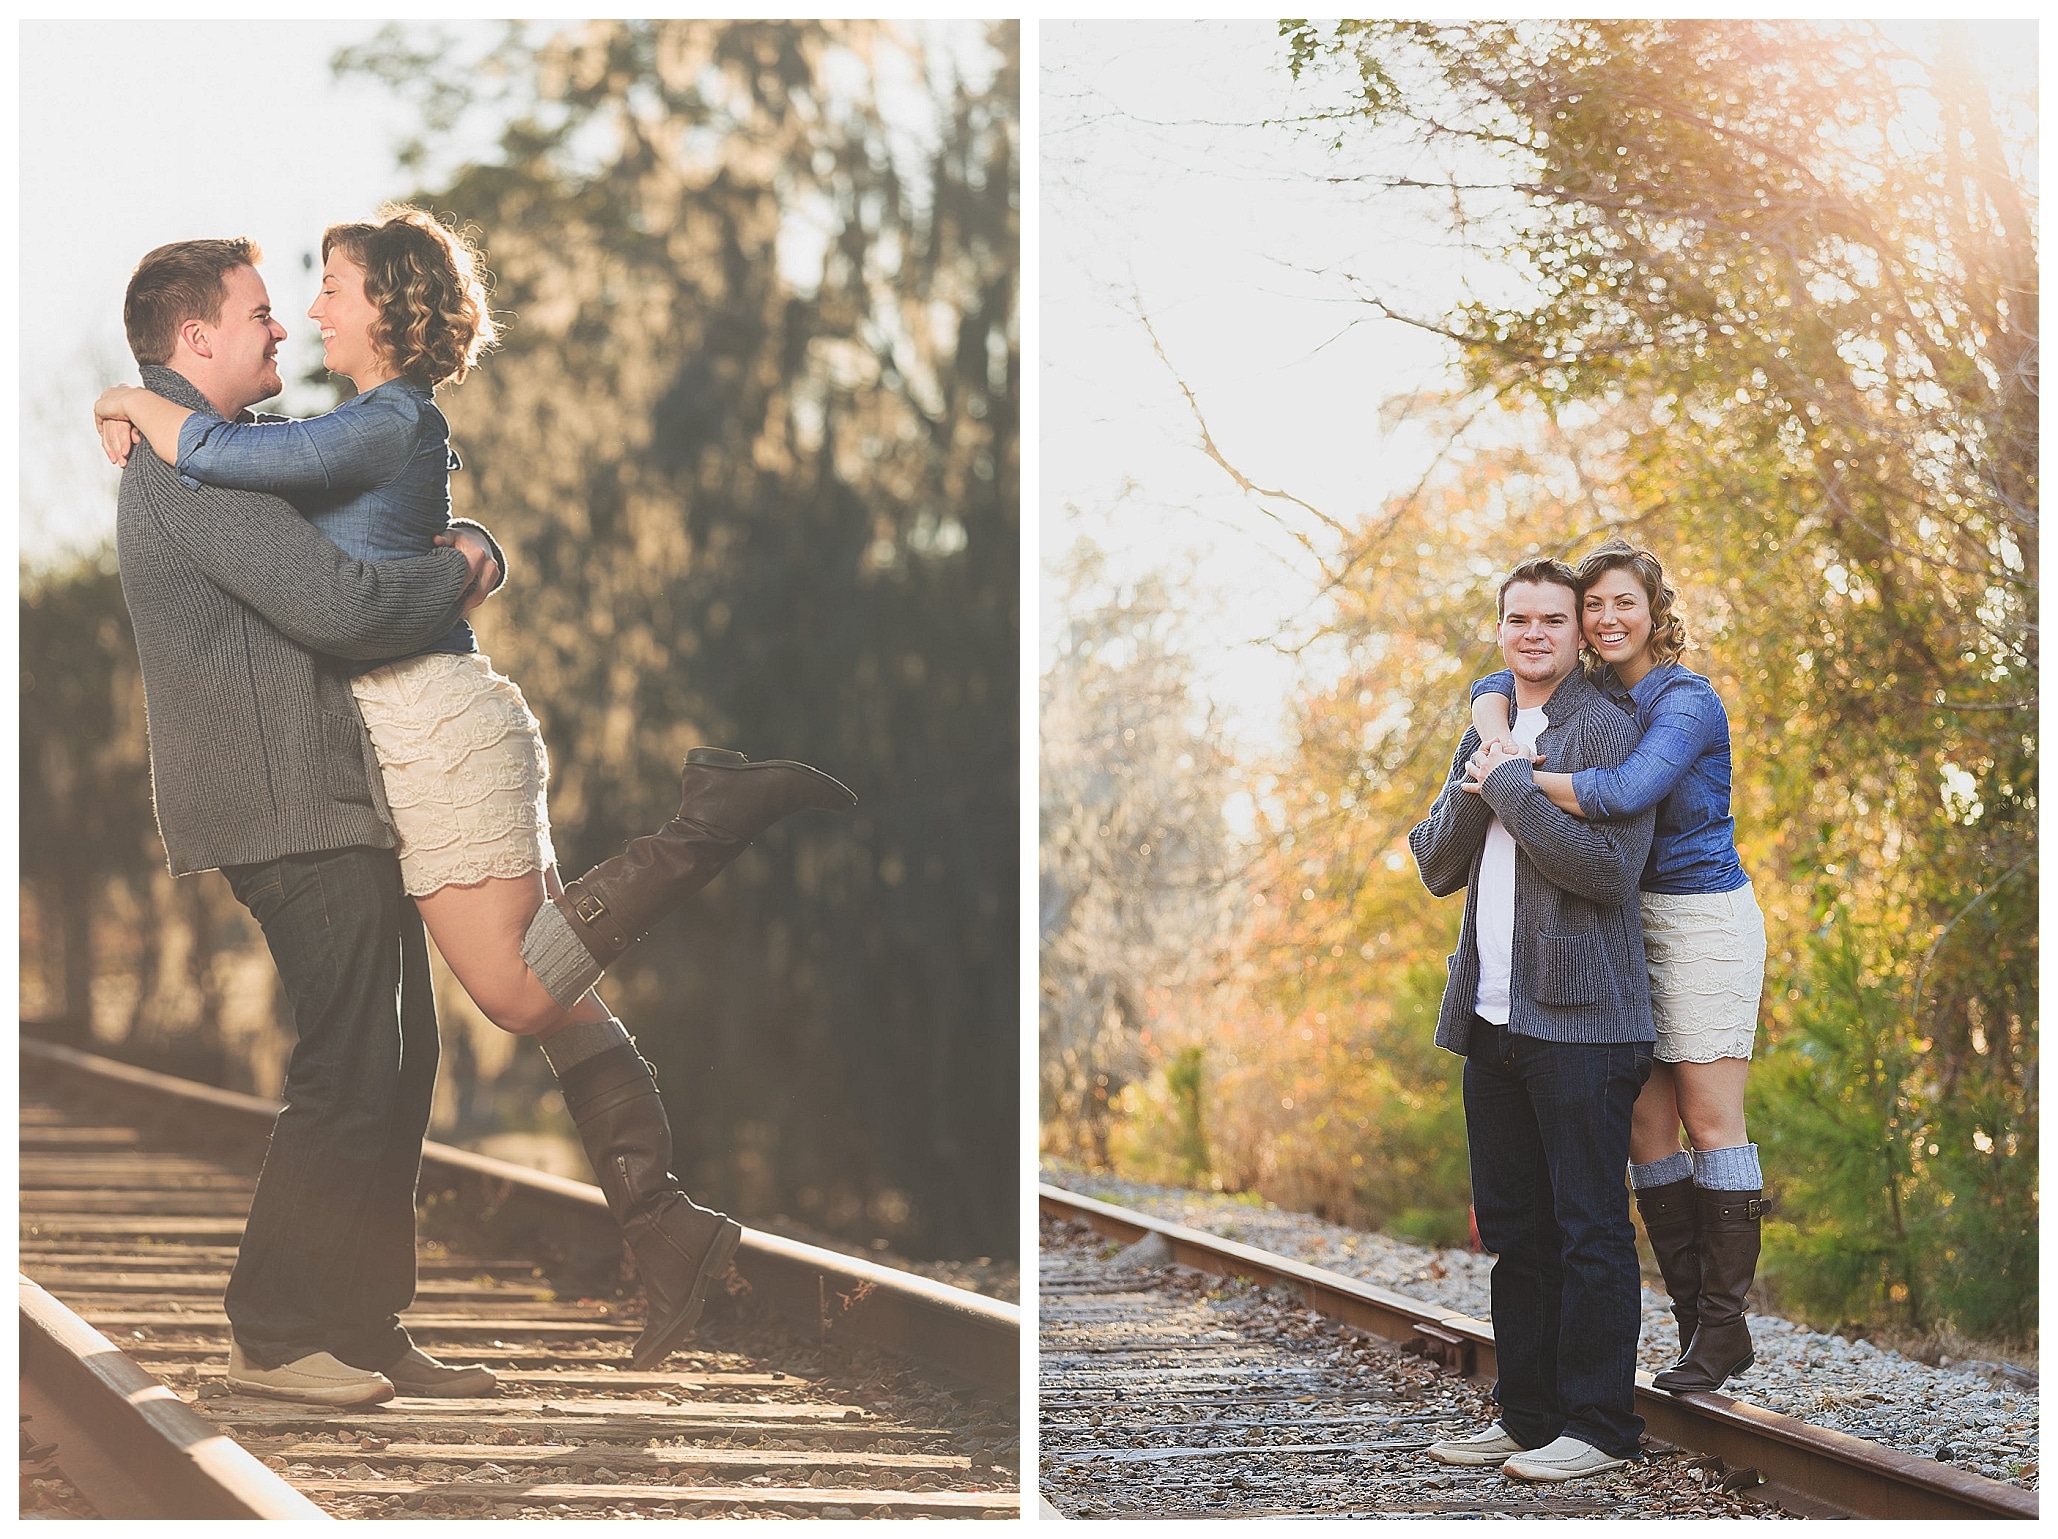 Couple having fun during their photo session with One Life photography